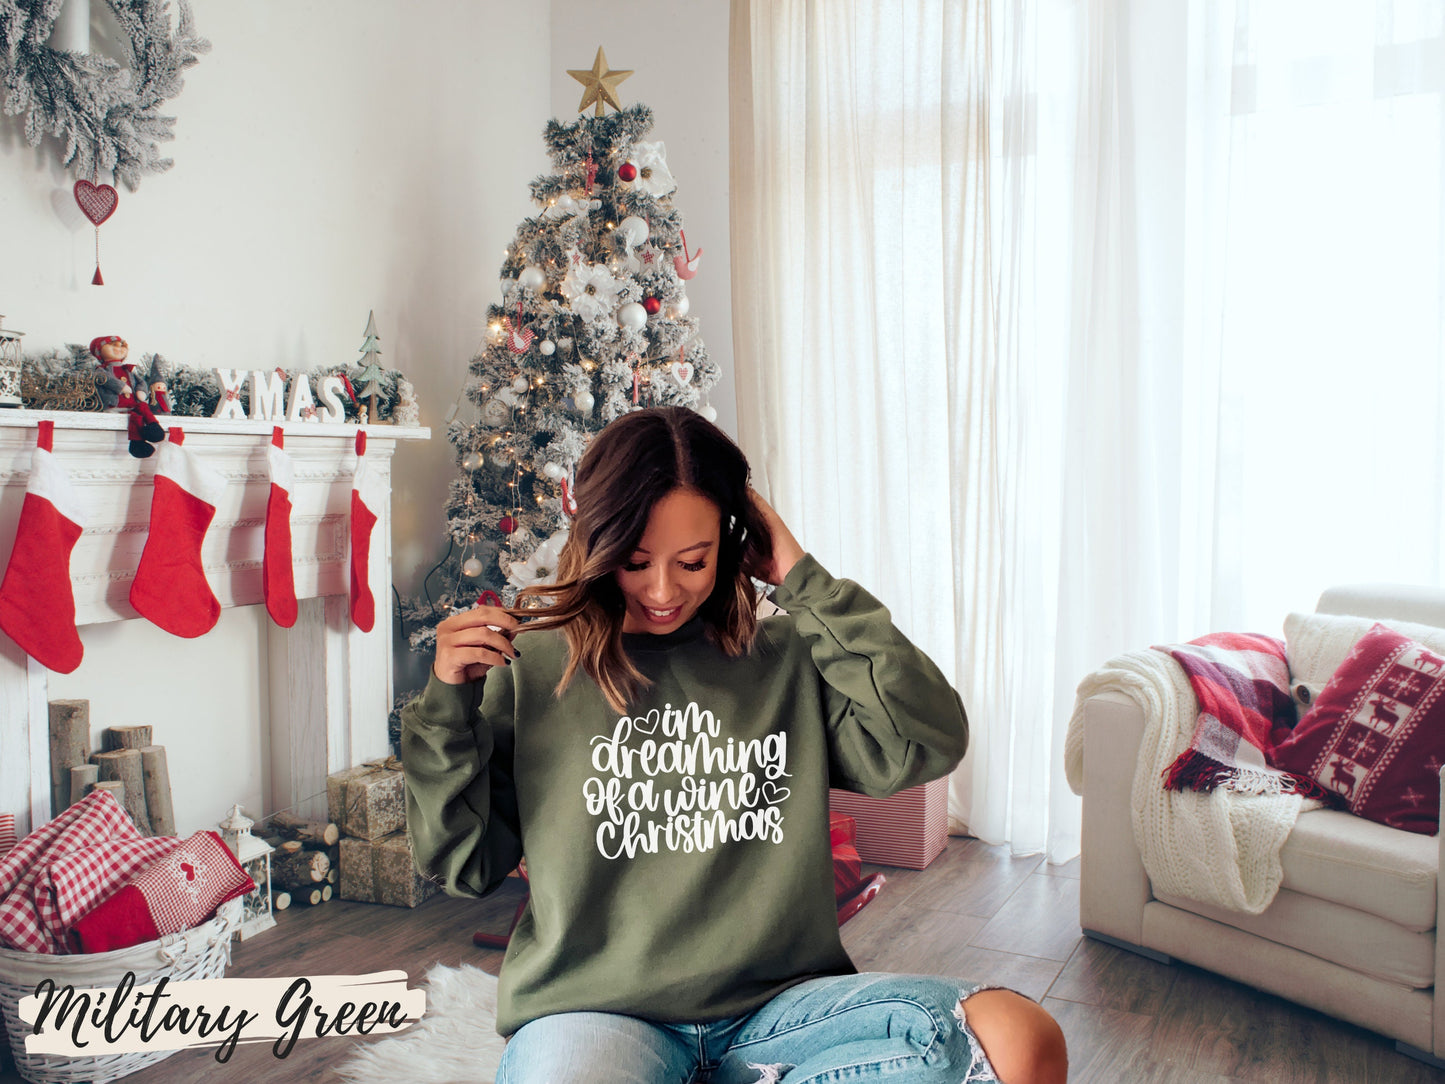 Funny Christmas Sweatshirt, I'm Dreaming of a Wine Christmas, Ugly Christmas Shirt - Mardonyx Sweatshirt Military Green / Unisex - Small